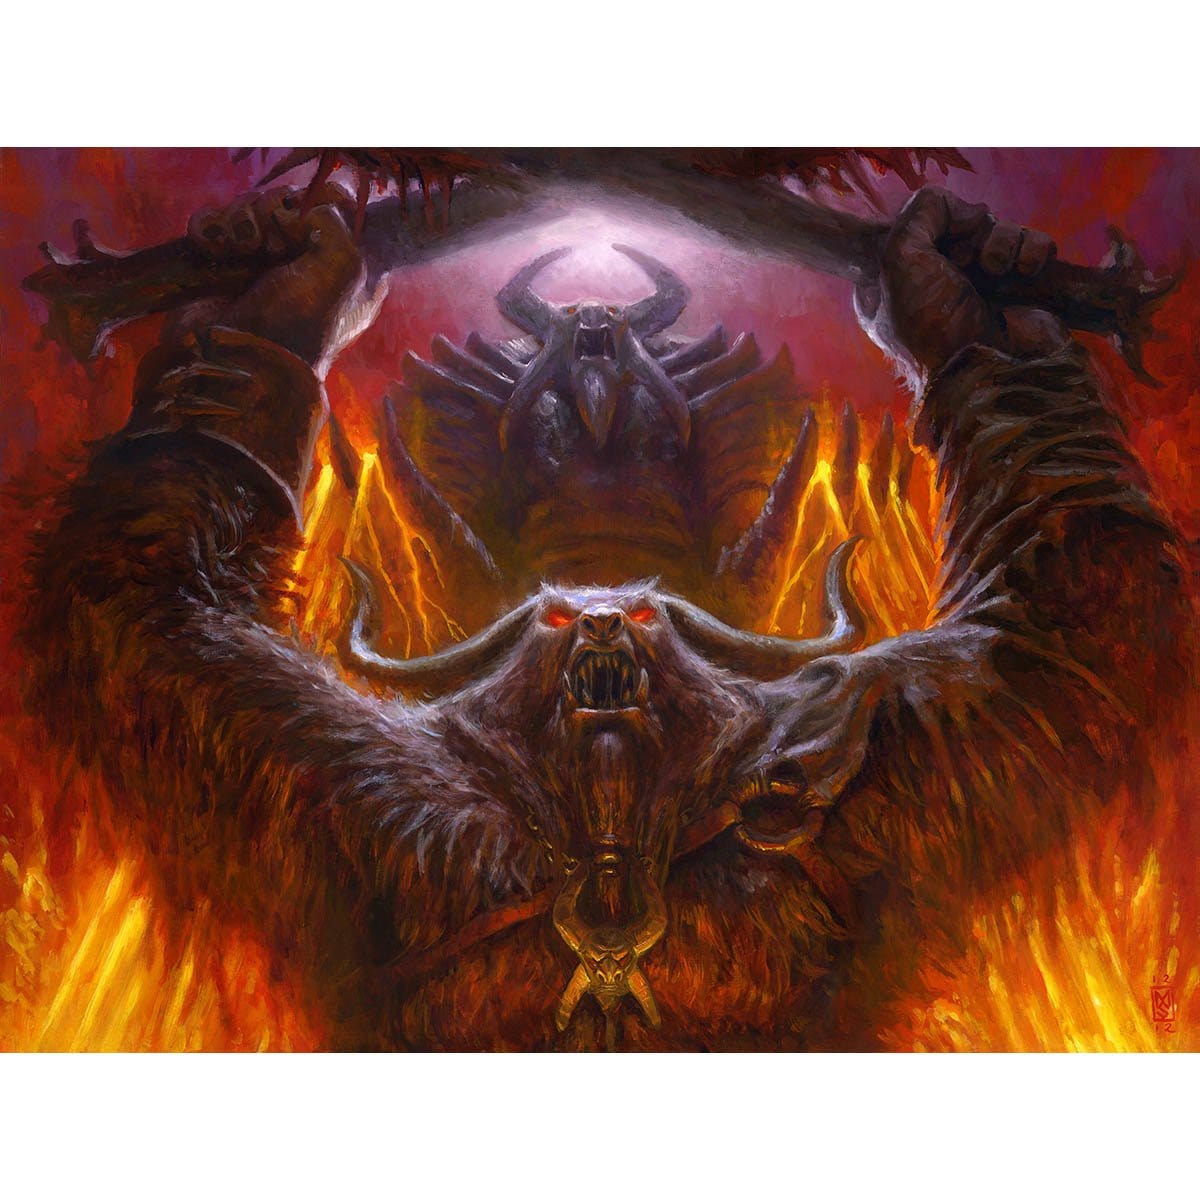 Fanatic of Mogis Print - Print - Original Magic Art - Accessories for Magic the Gathering and other card games